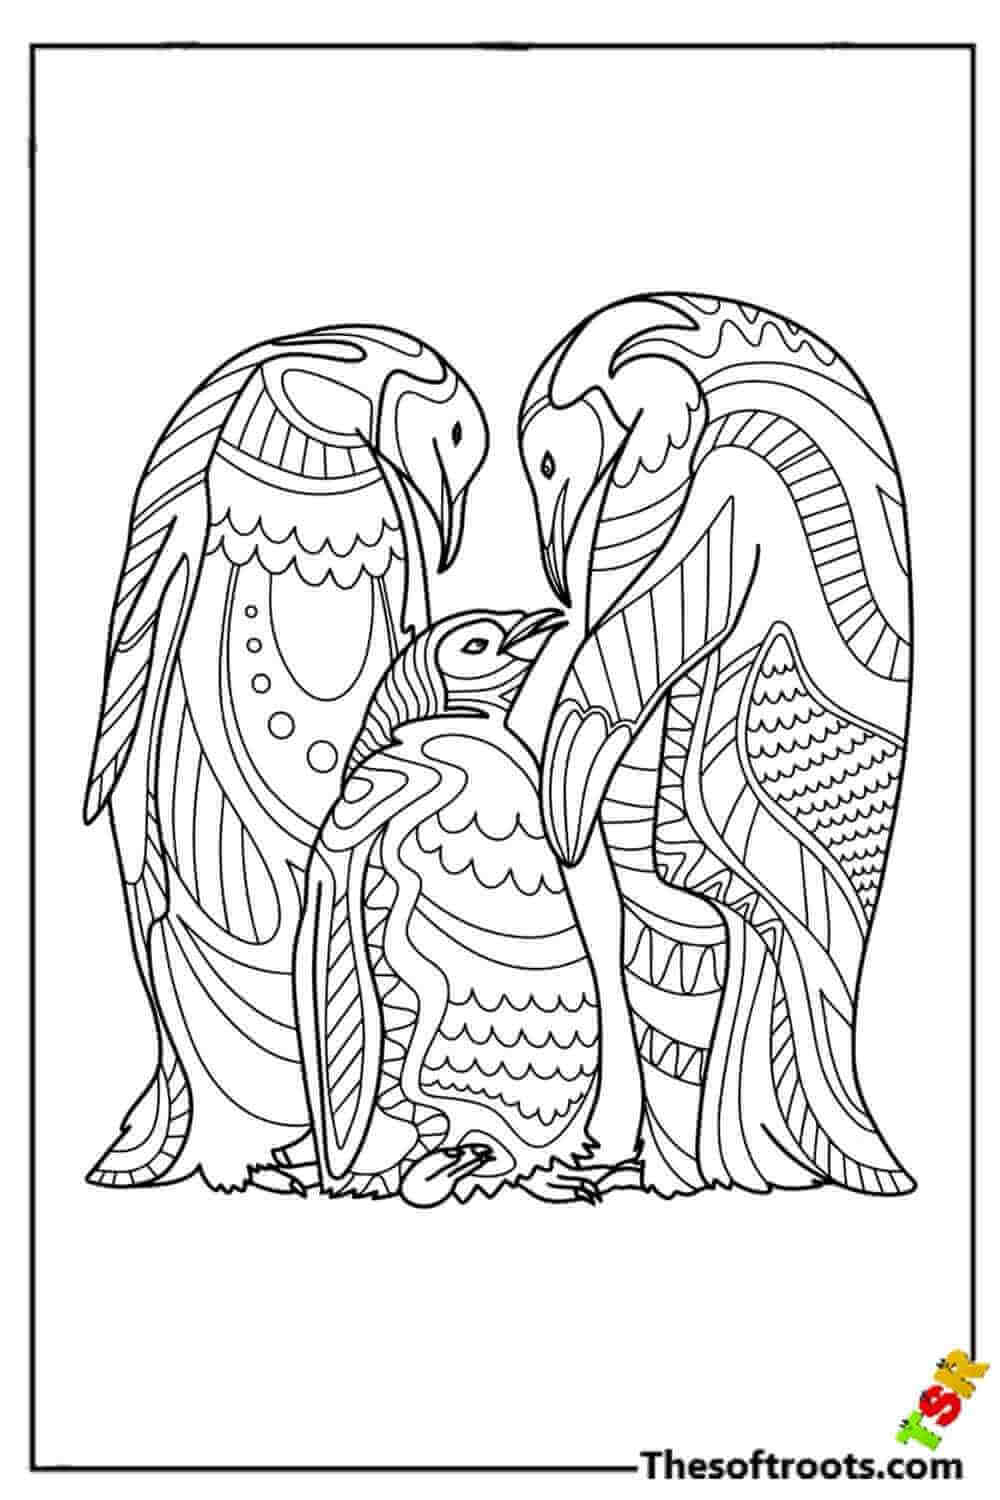 Adult Penguin coloring pages